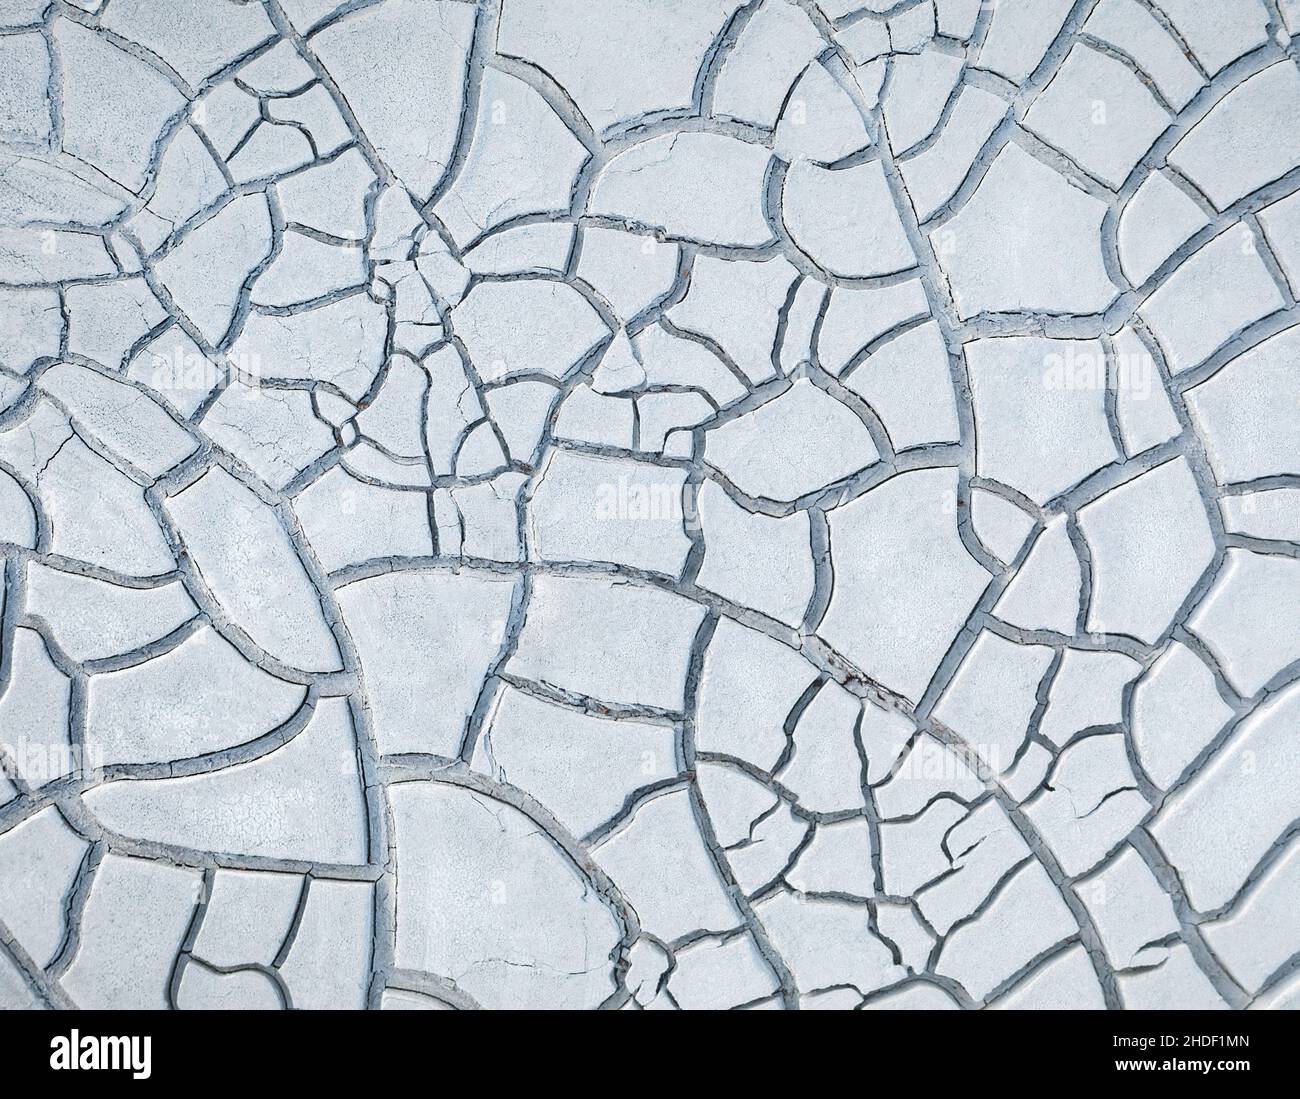 Cracked white clay on dried lakebed, natural pattern Stock Photo